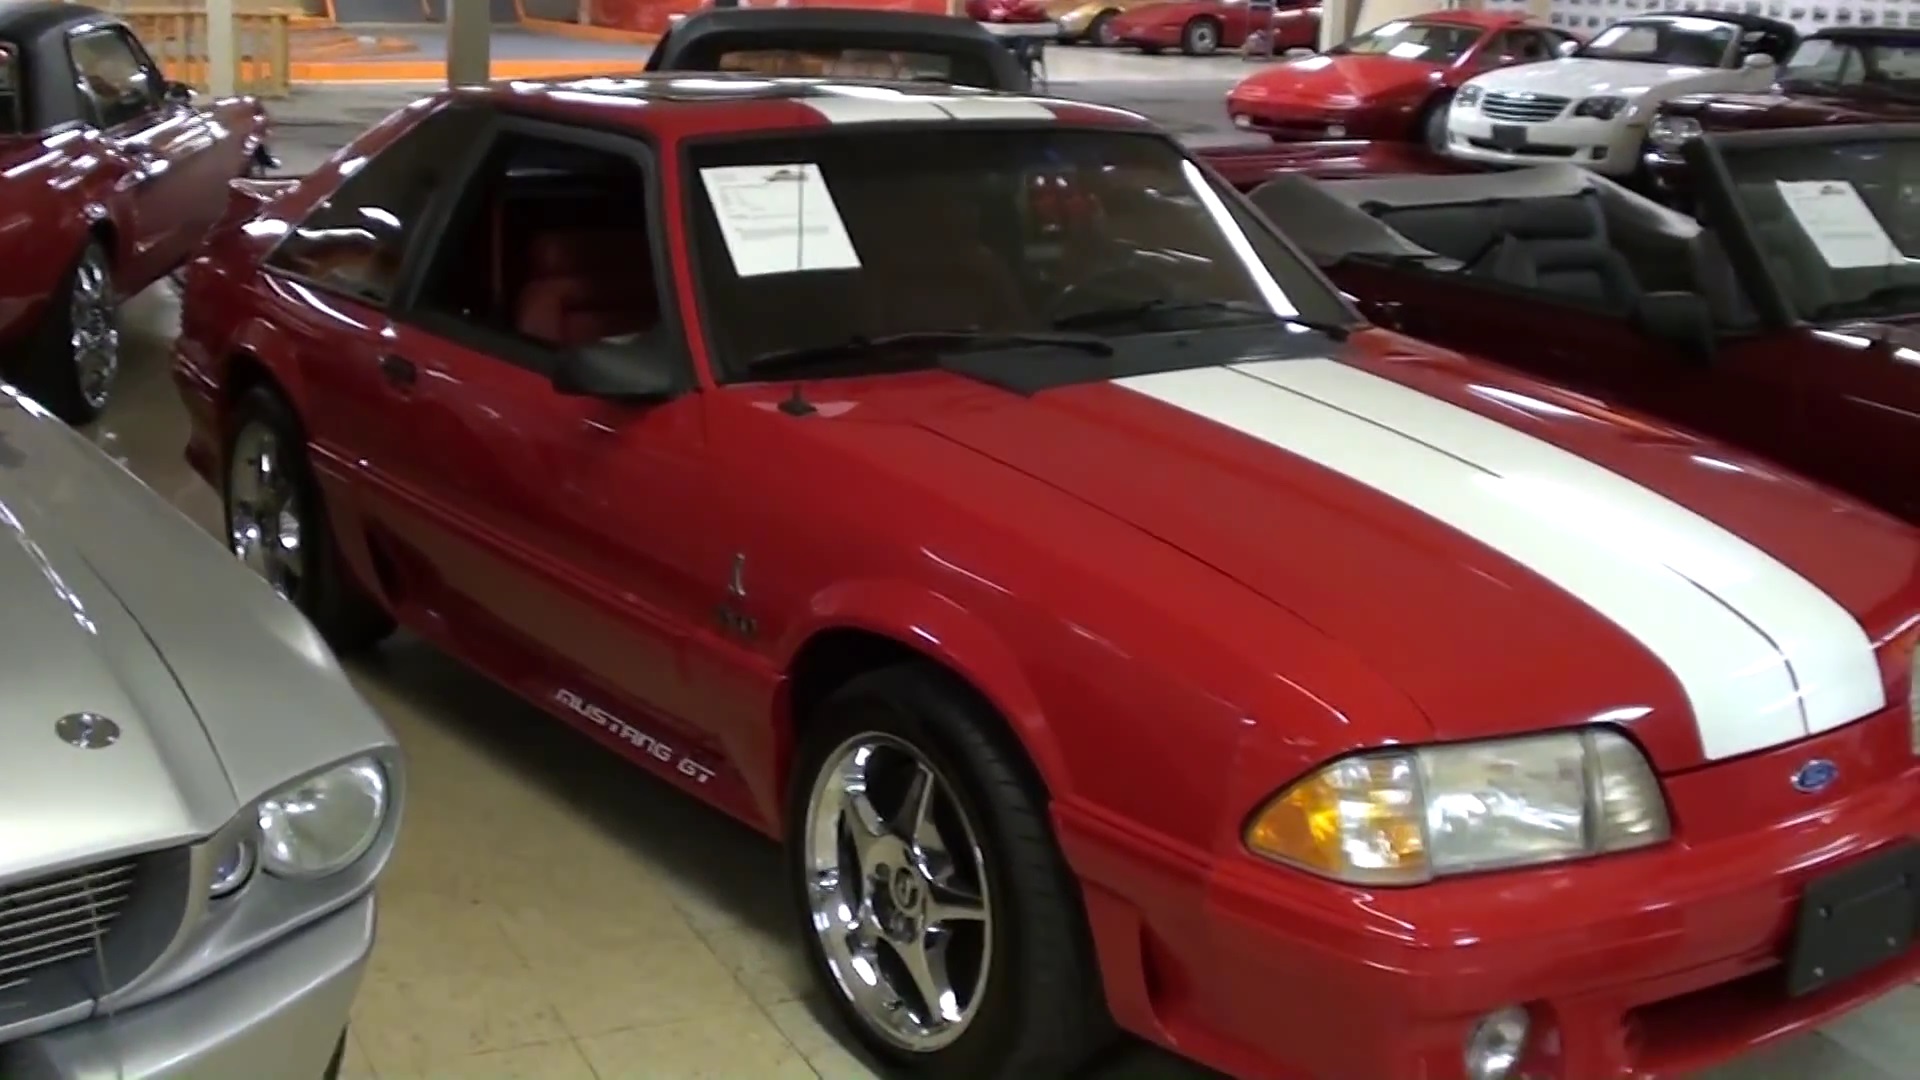 Video: Quick Look At A 1991 Ford Mustang GT 5.0 Fox Body